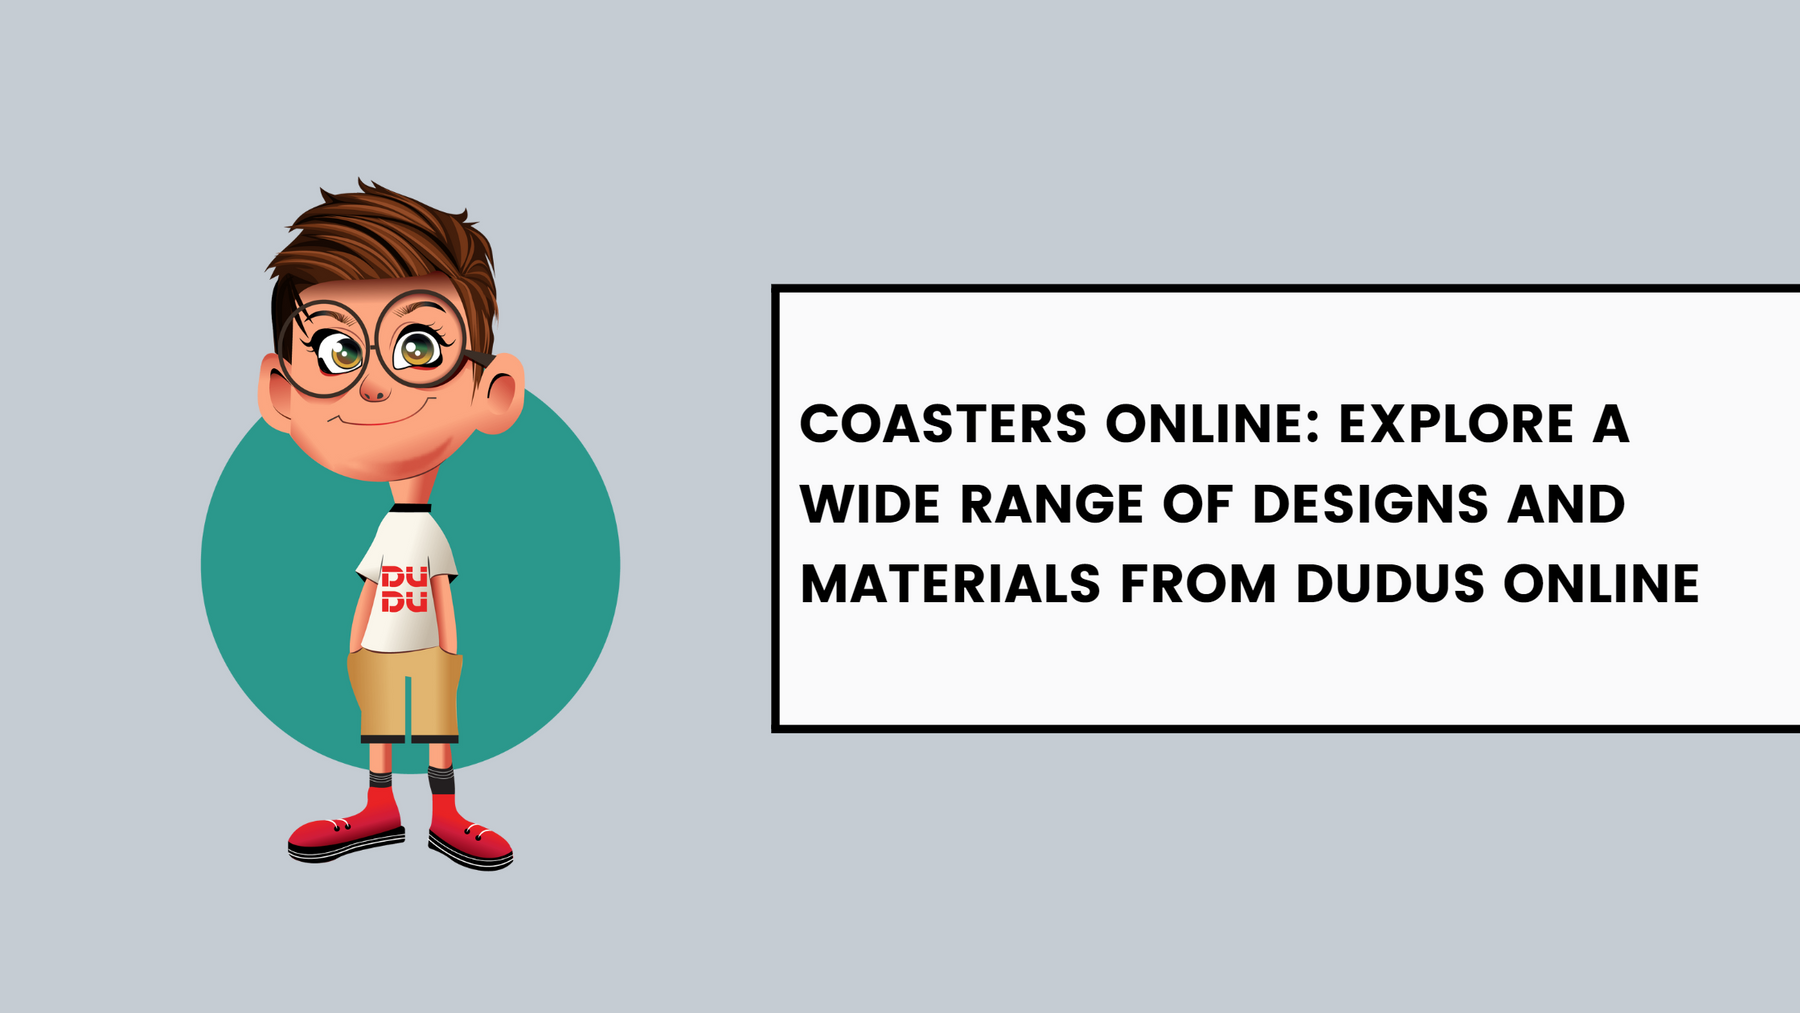 Coasters Online: Explore A Wide Range Of Designs And Materials From Dudus Online